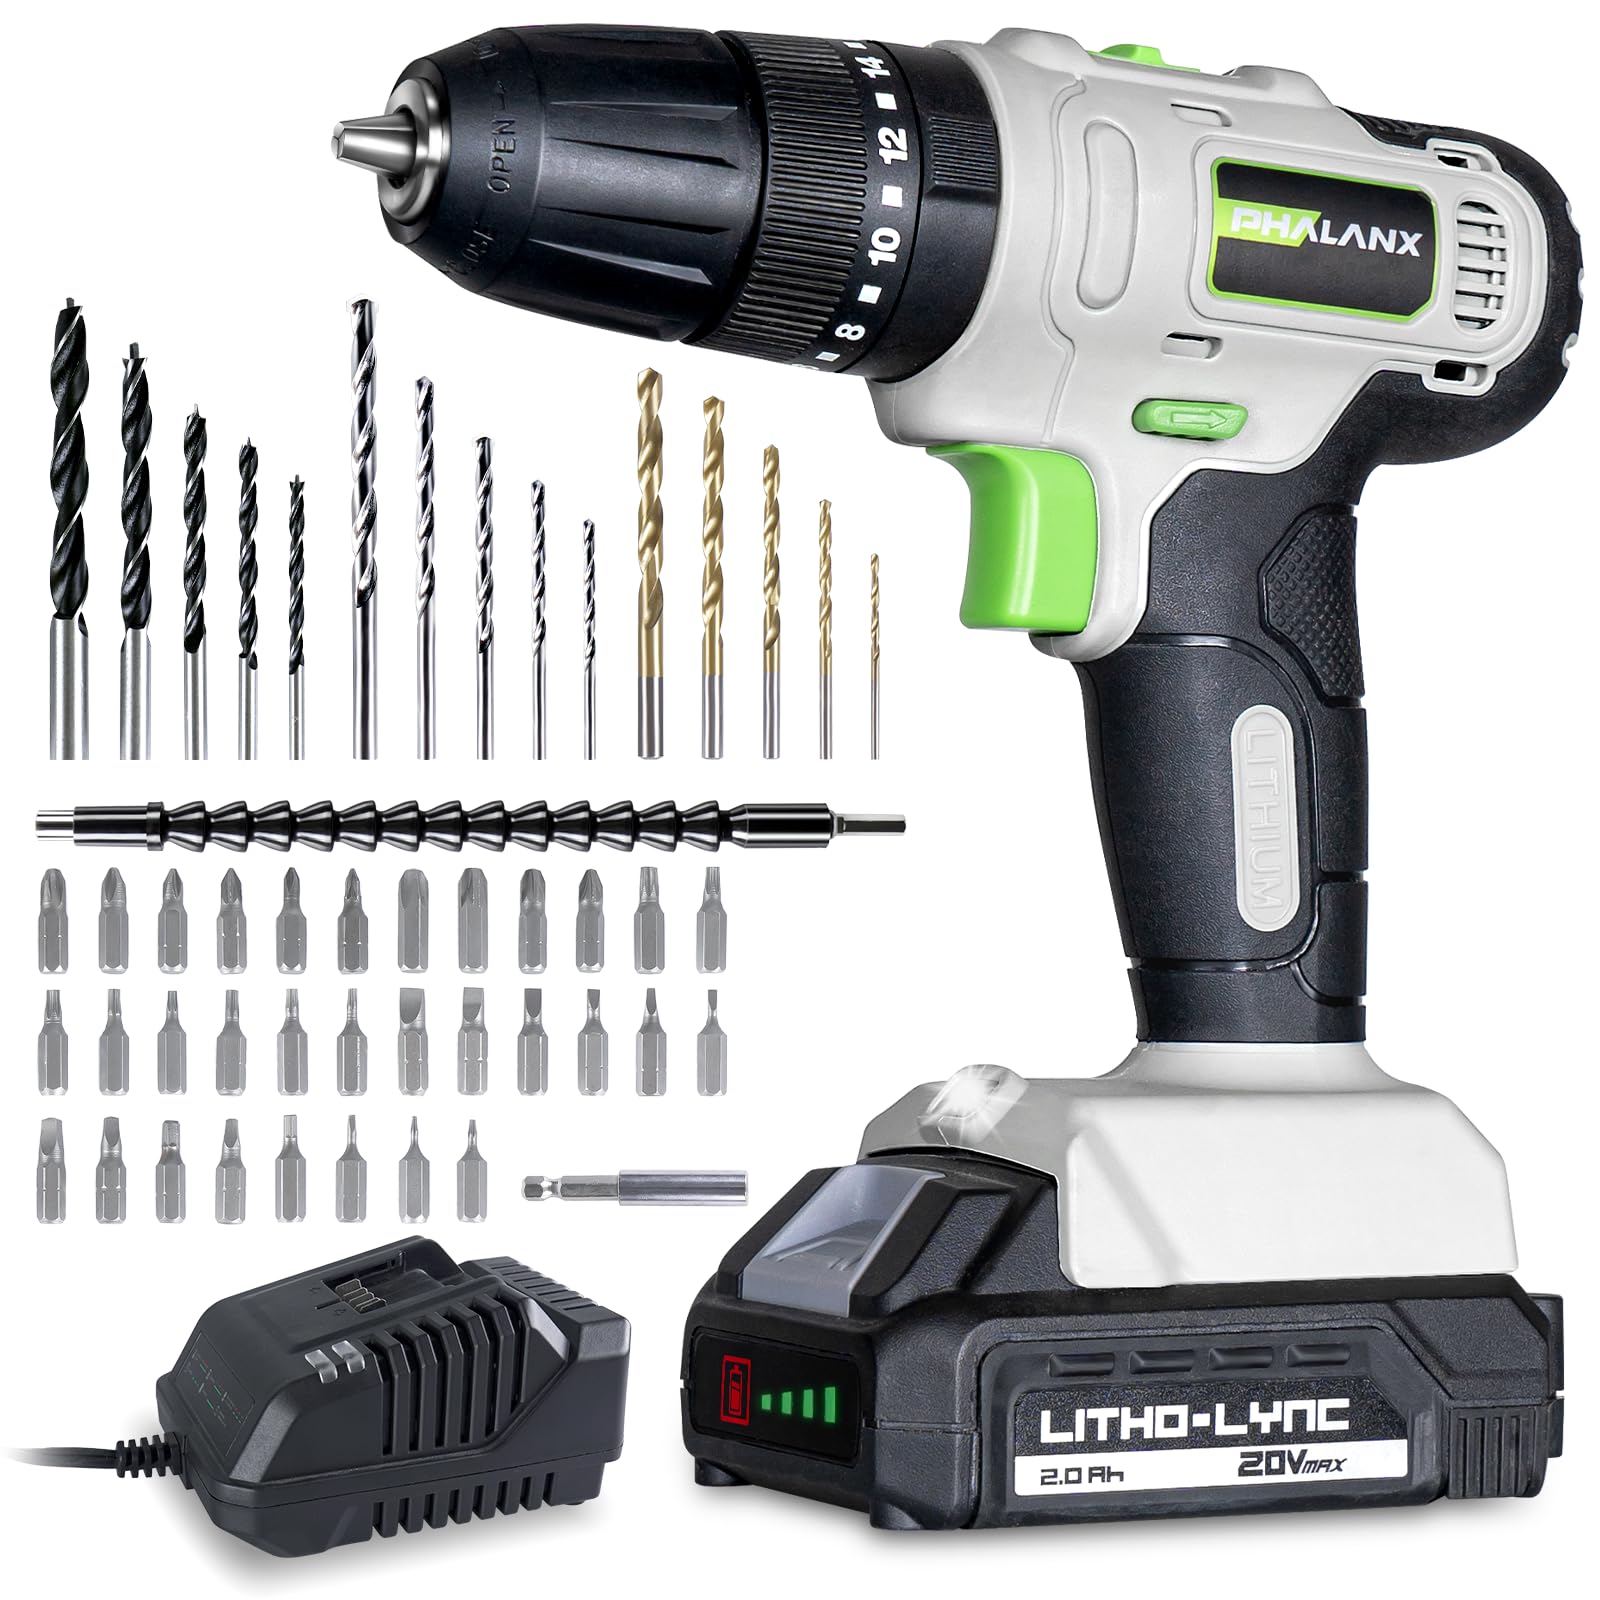 PHALANX 20V Cordless Drill Set - Multifunctional 3-in-1 Power Drill with Hammer Drill Function, 20+3 Electric Drill with Battery and Fast Charger, 3/8